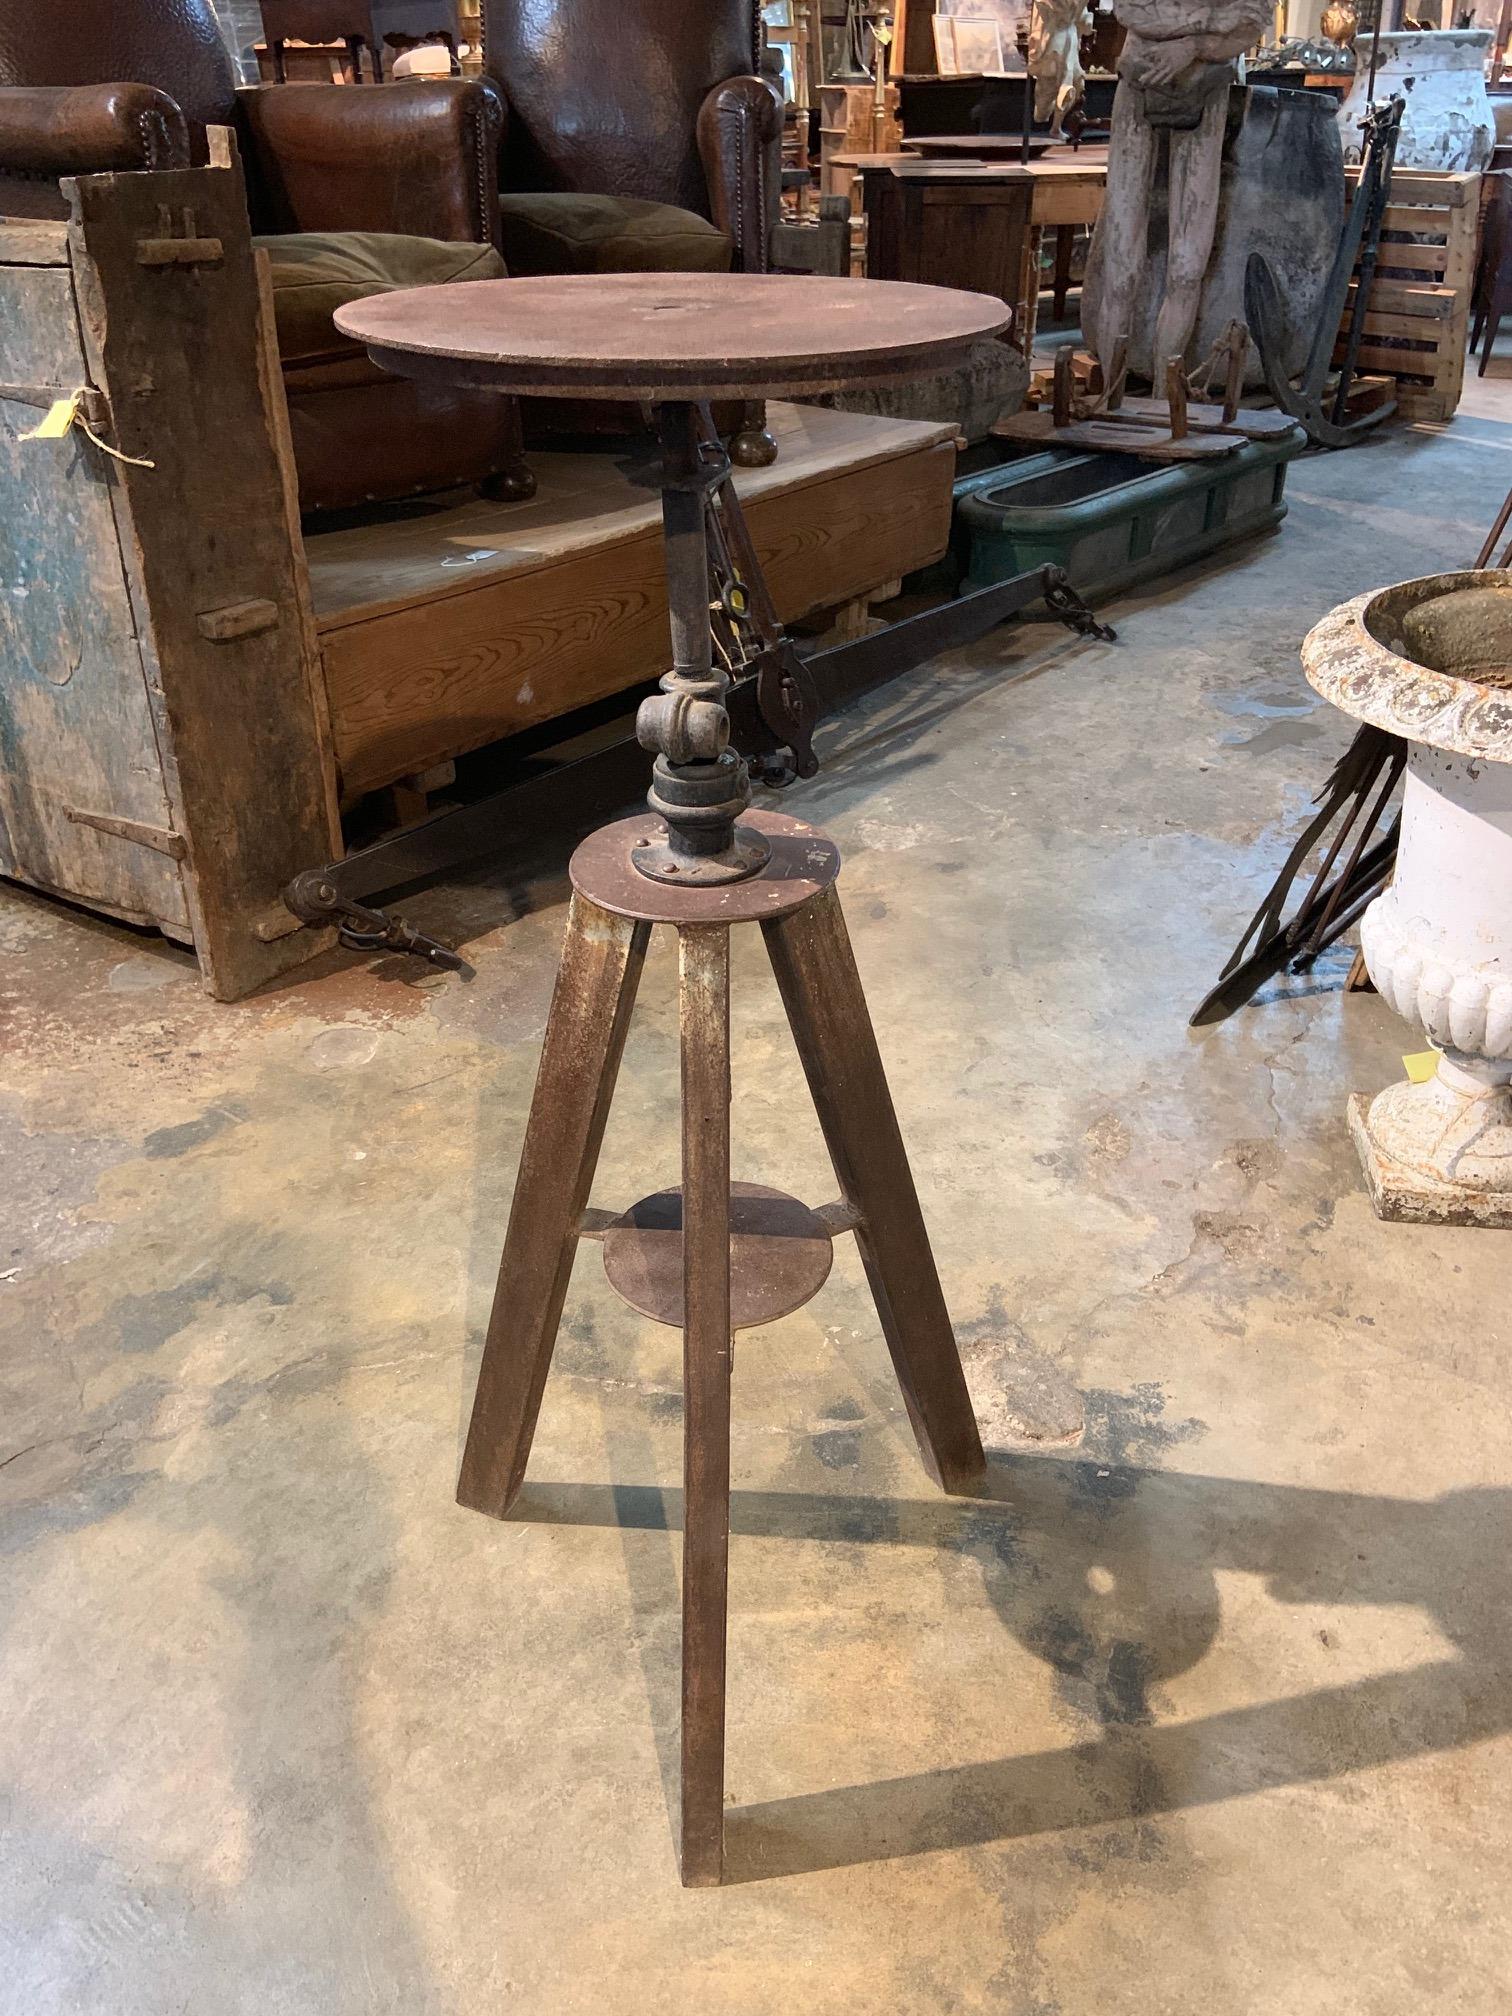 A terrific early 20th century industrial Selette - Sculptor's stand from the South of France. Sturdily constructed from iron with a great patina. Wonderful for the display of artwork. The footprint measures 17